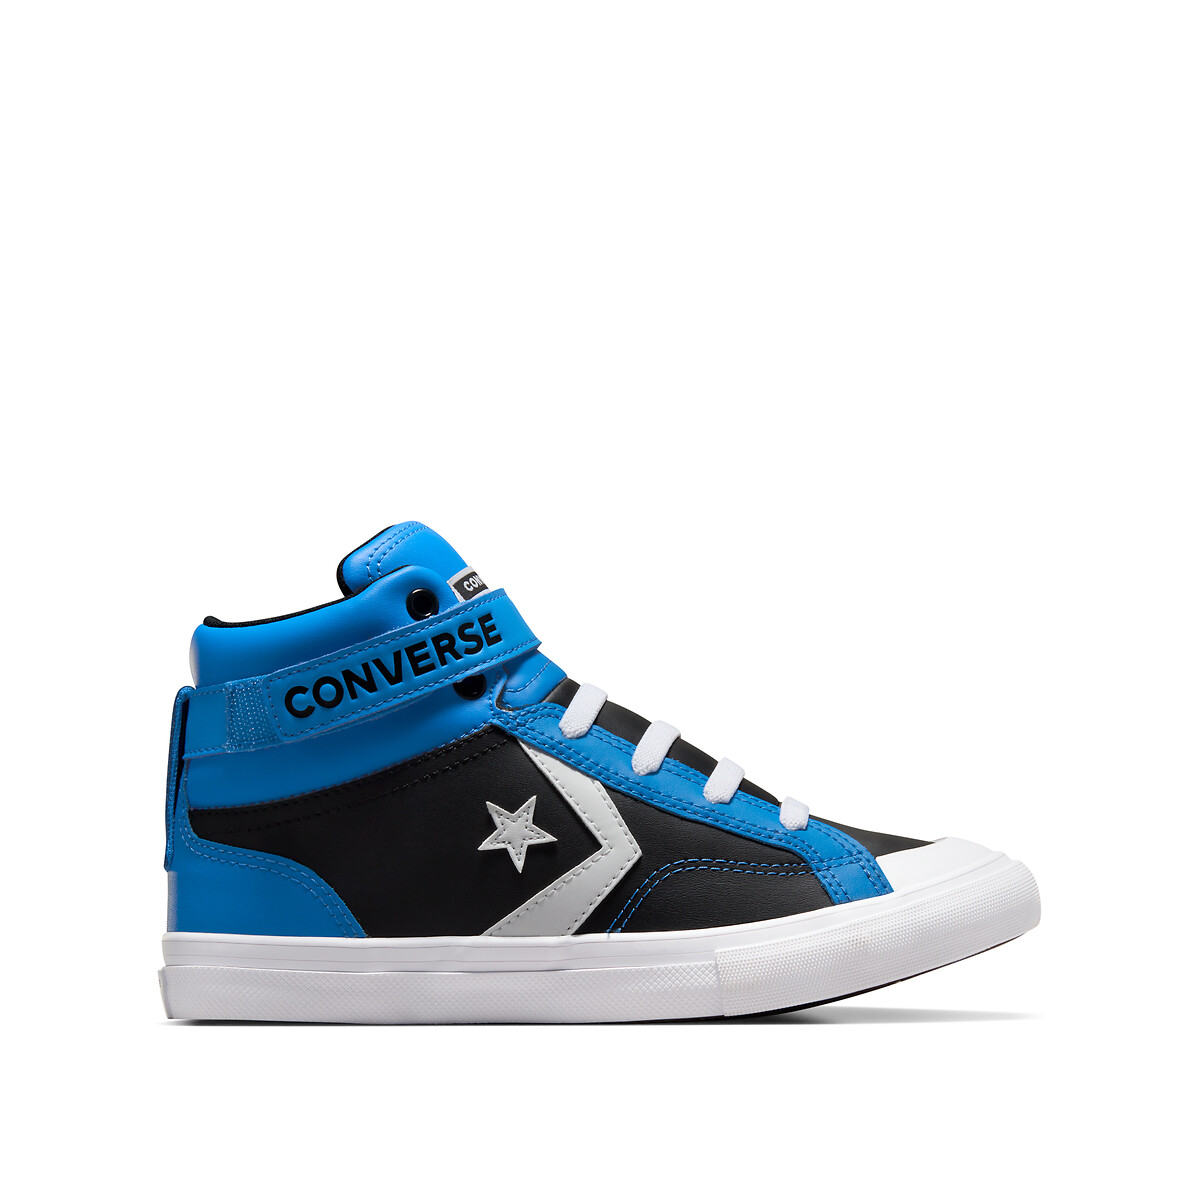 Image of Kids Pro Blaze Retro Sport Leather High Top Trainers